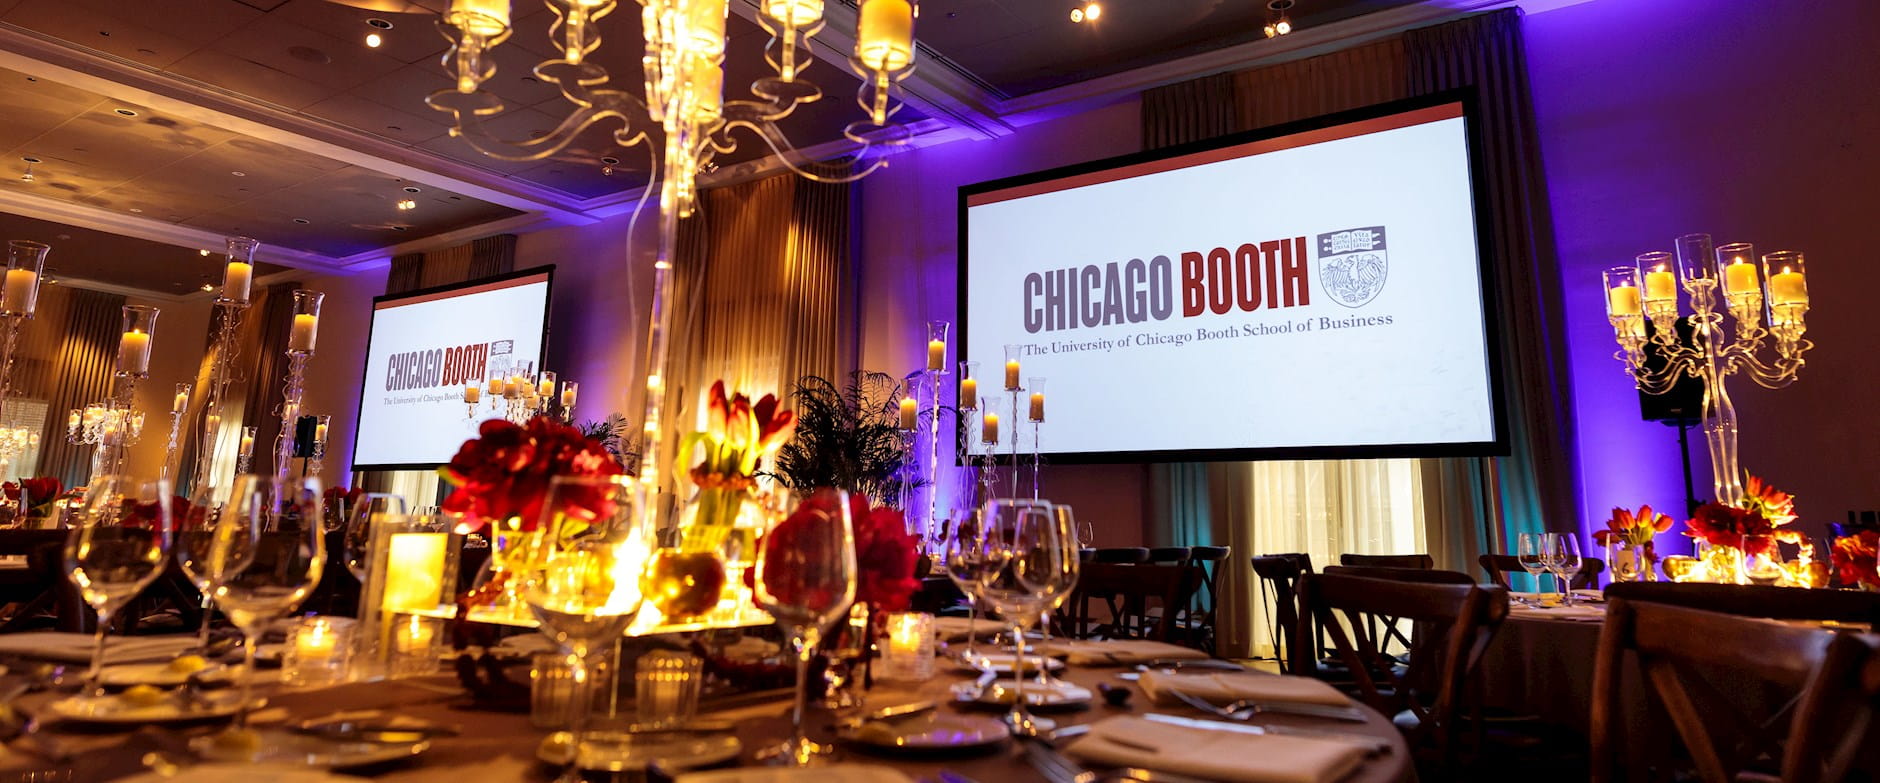 Chicago Booth's Distinguished Alumni Awards dinner table